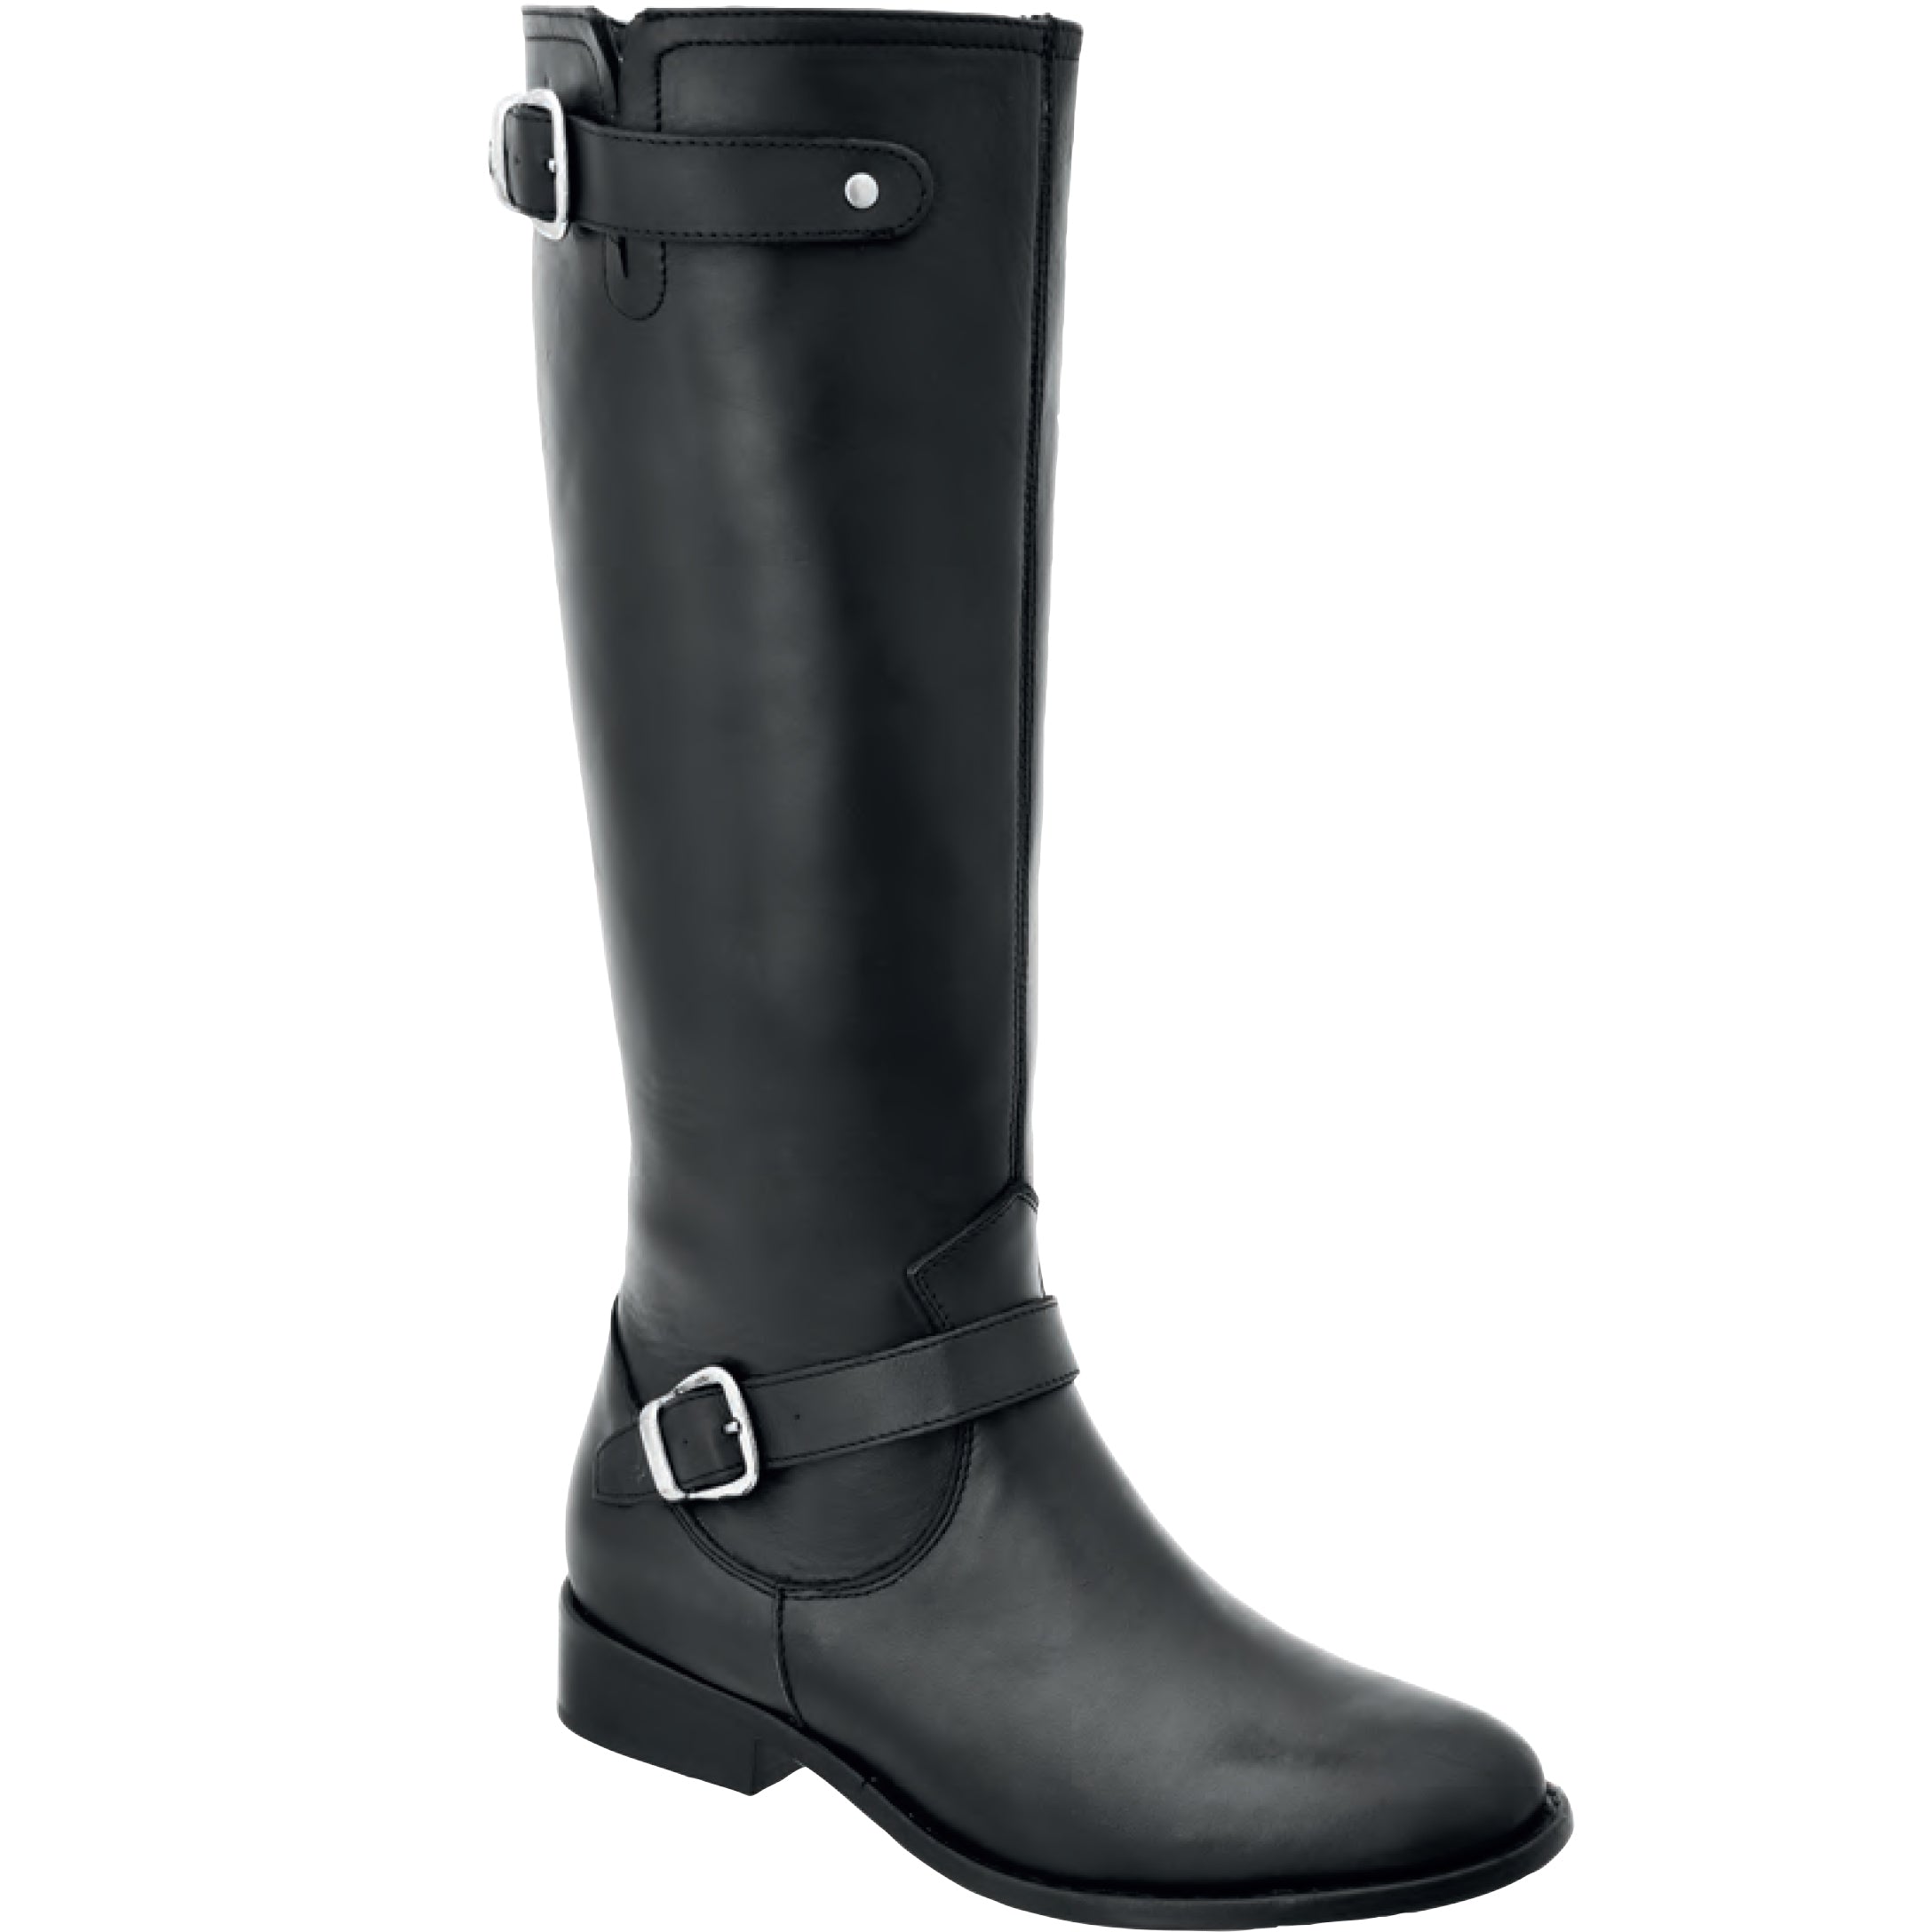 Black Riding Boots For Women 